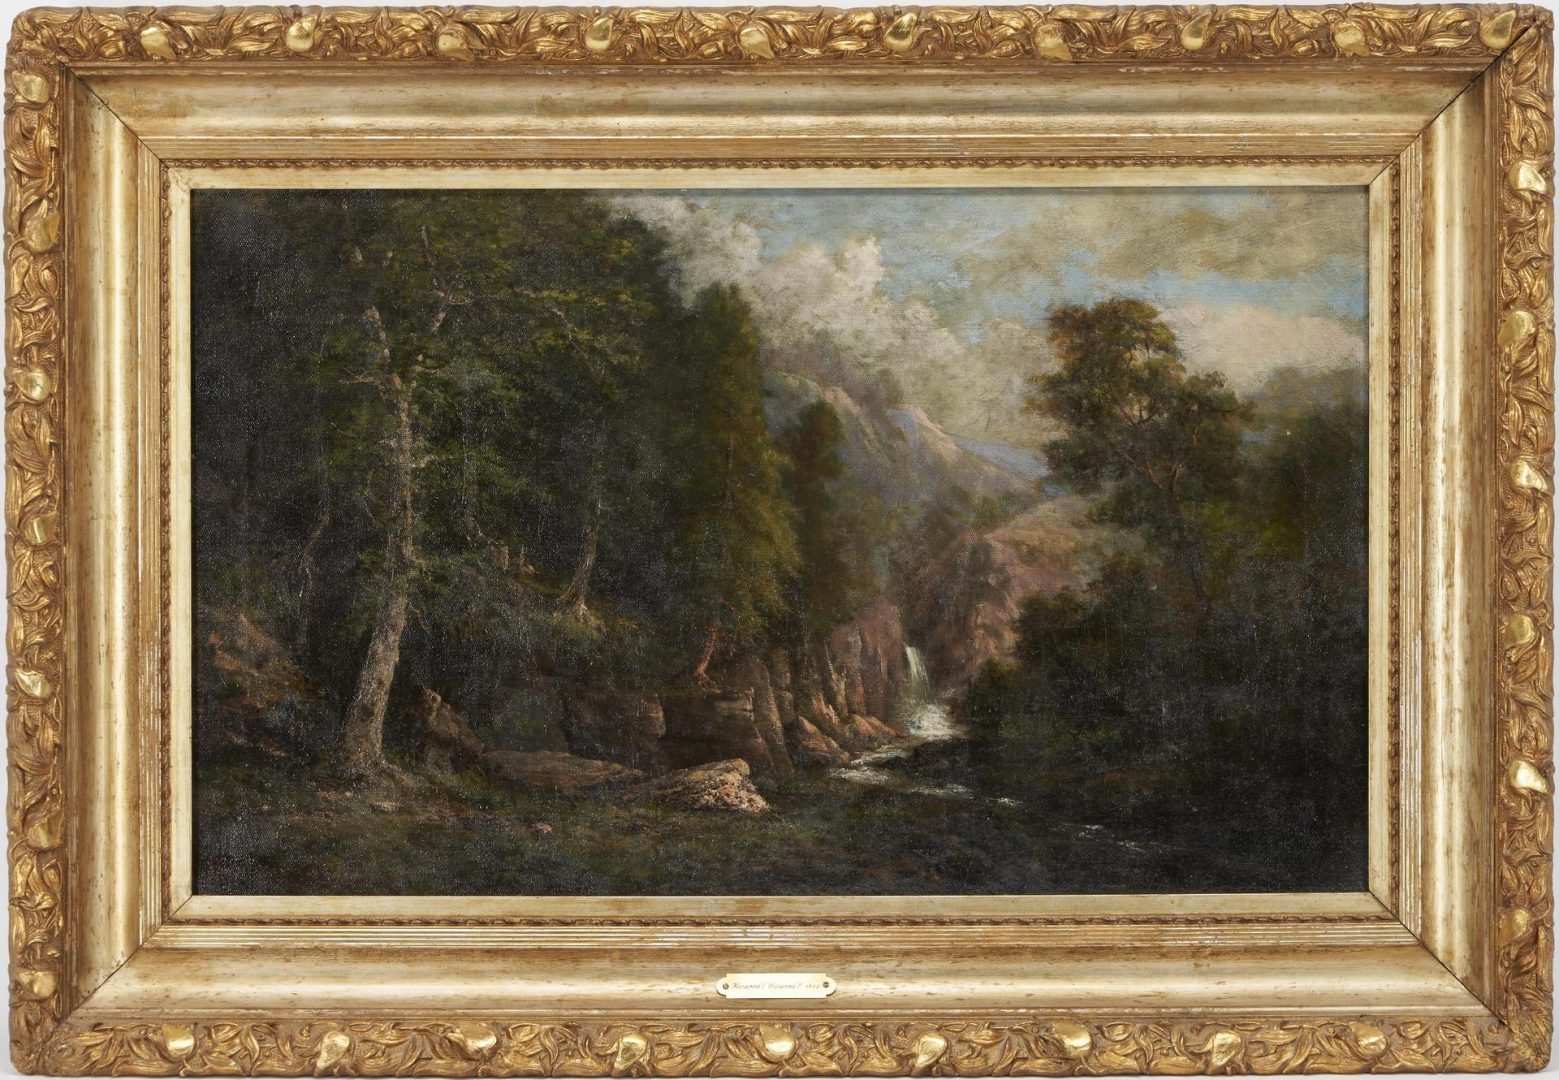 Lot 94: American School Landscape O/C Painting w/ Waterfall, Signed